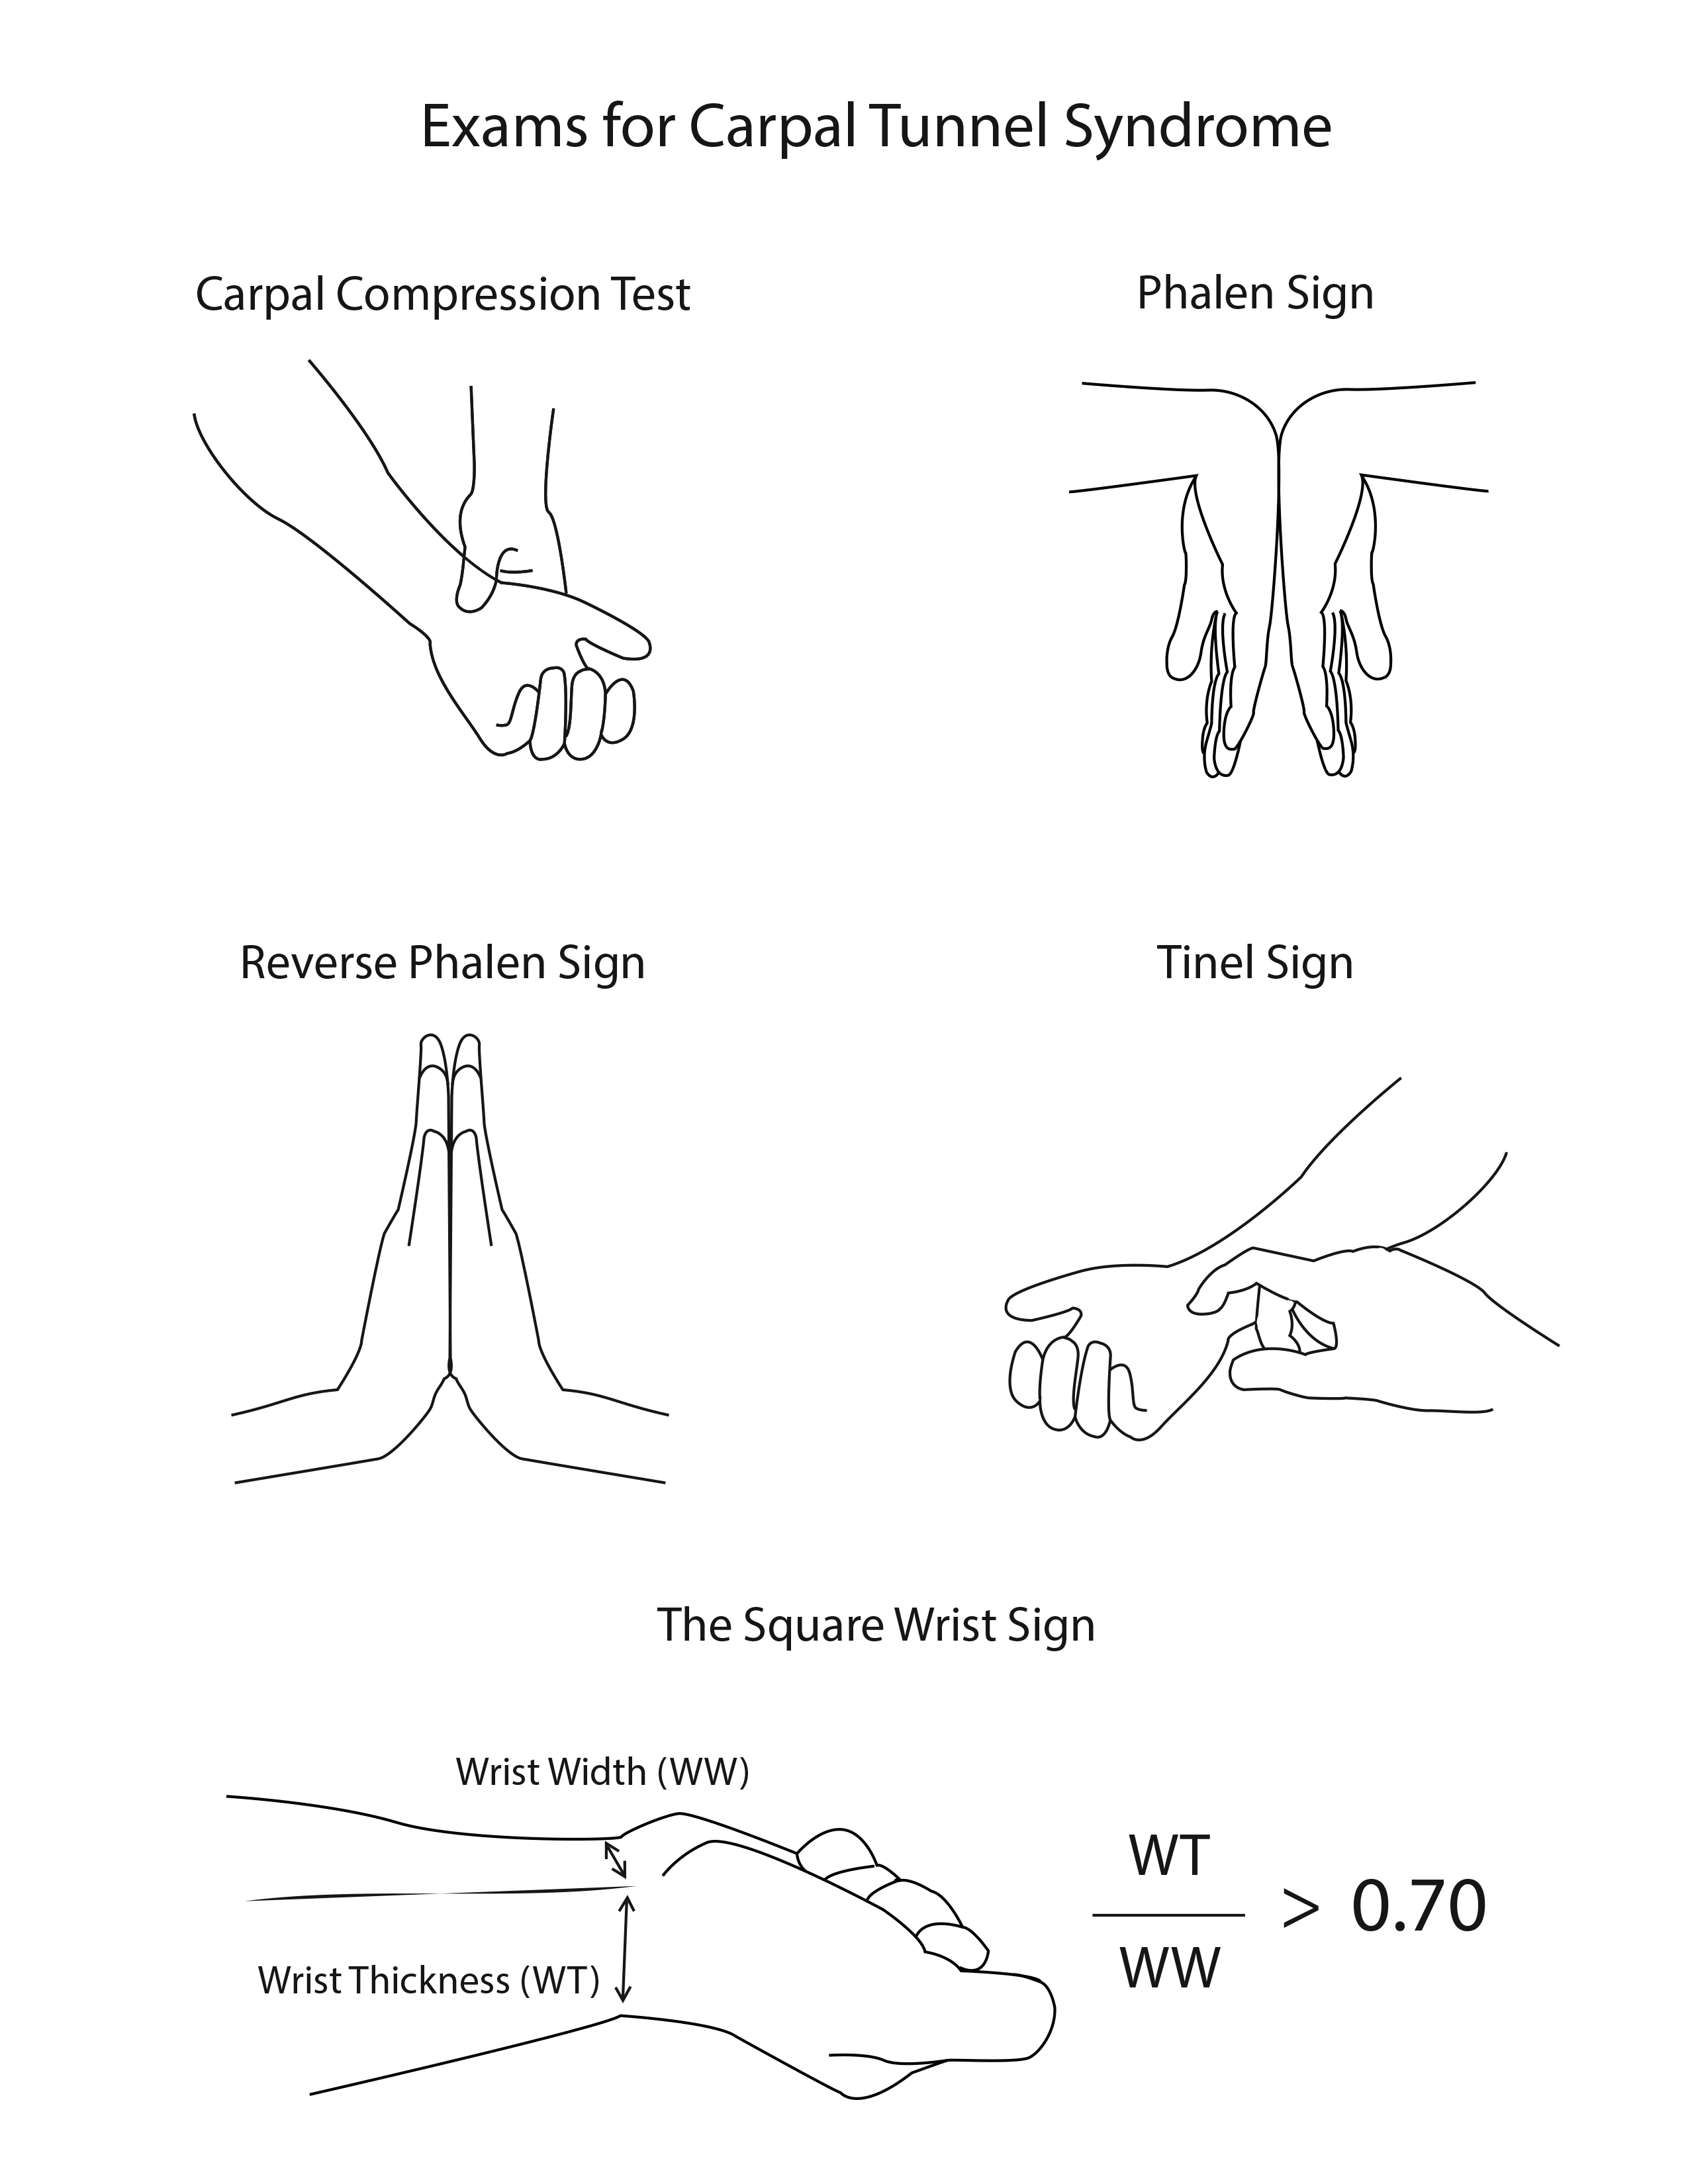 <p>Carpal Tunnel Physical Exam. The illustration depicts some maneuvers that test for carpal tunnel syndrome.</p>